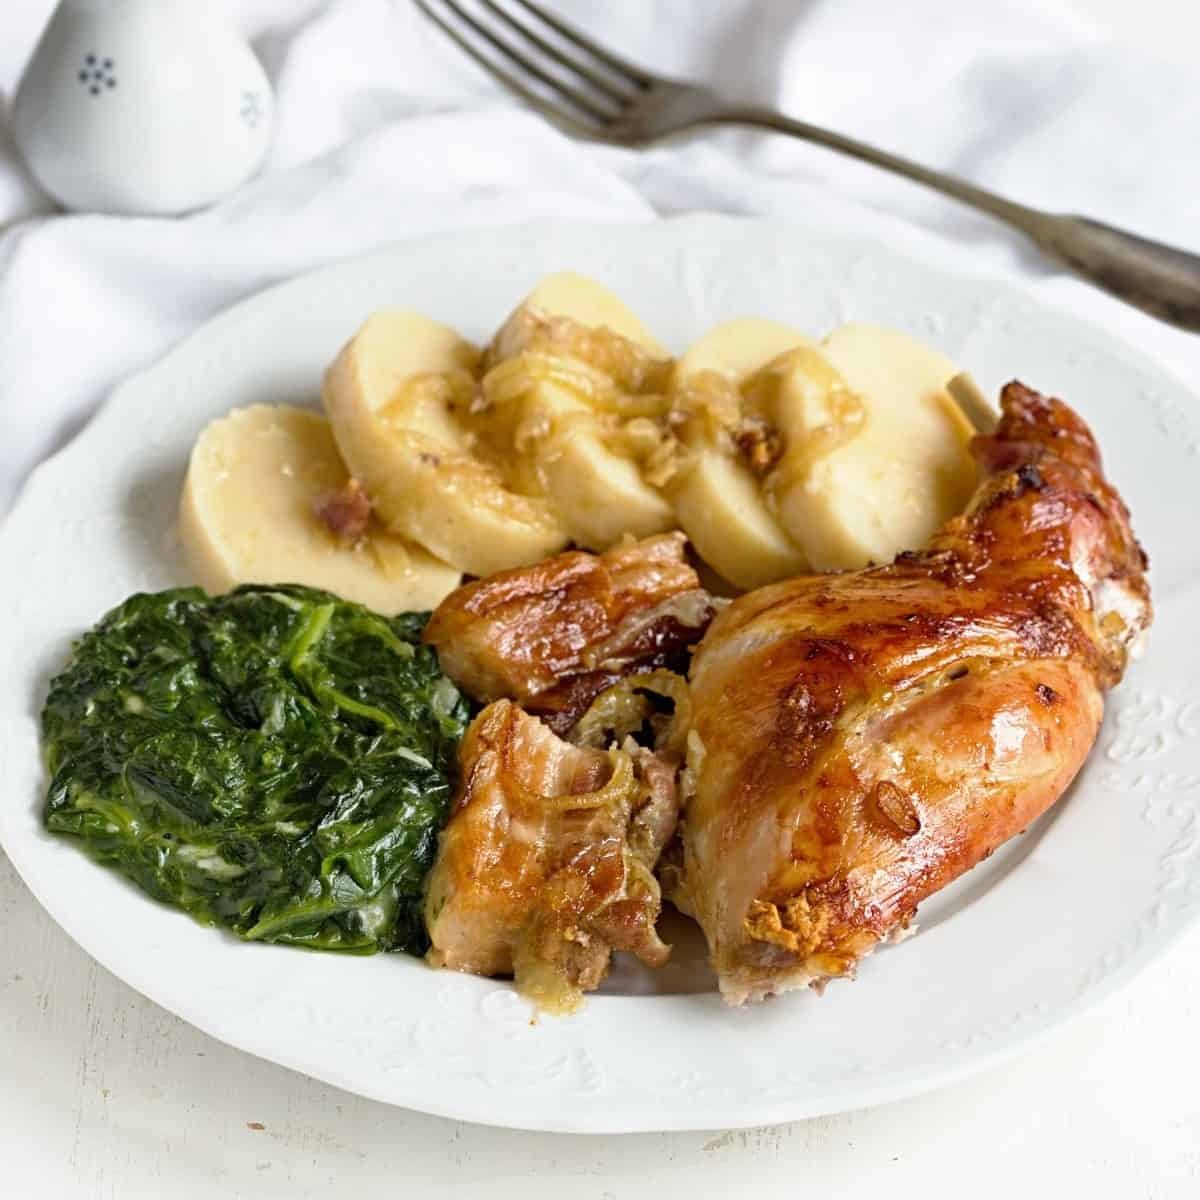 Oven roasted rabbit with garlic recipe.